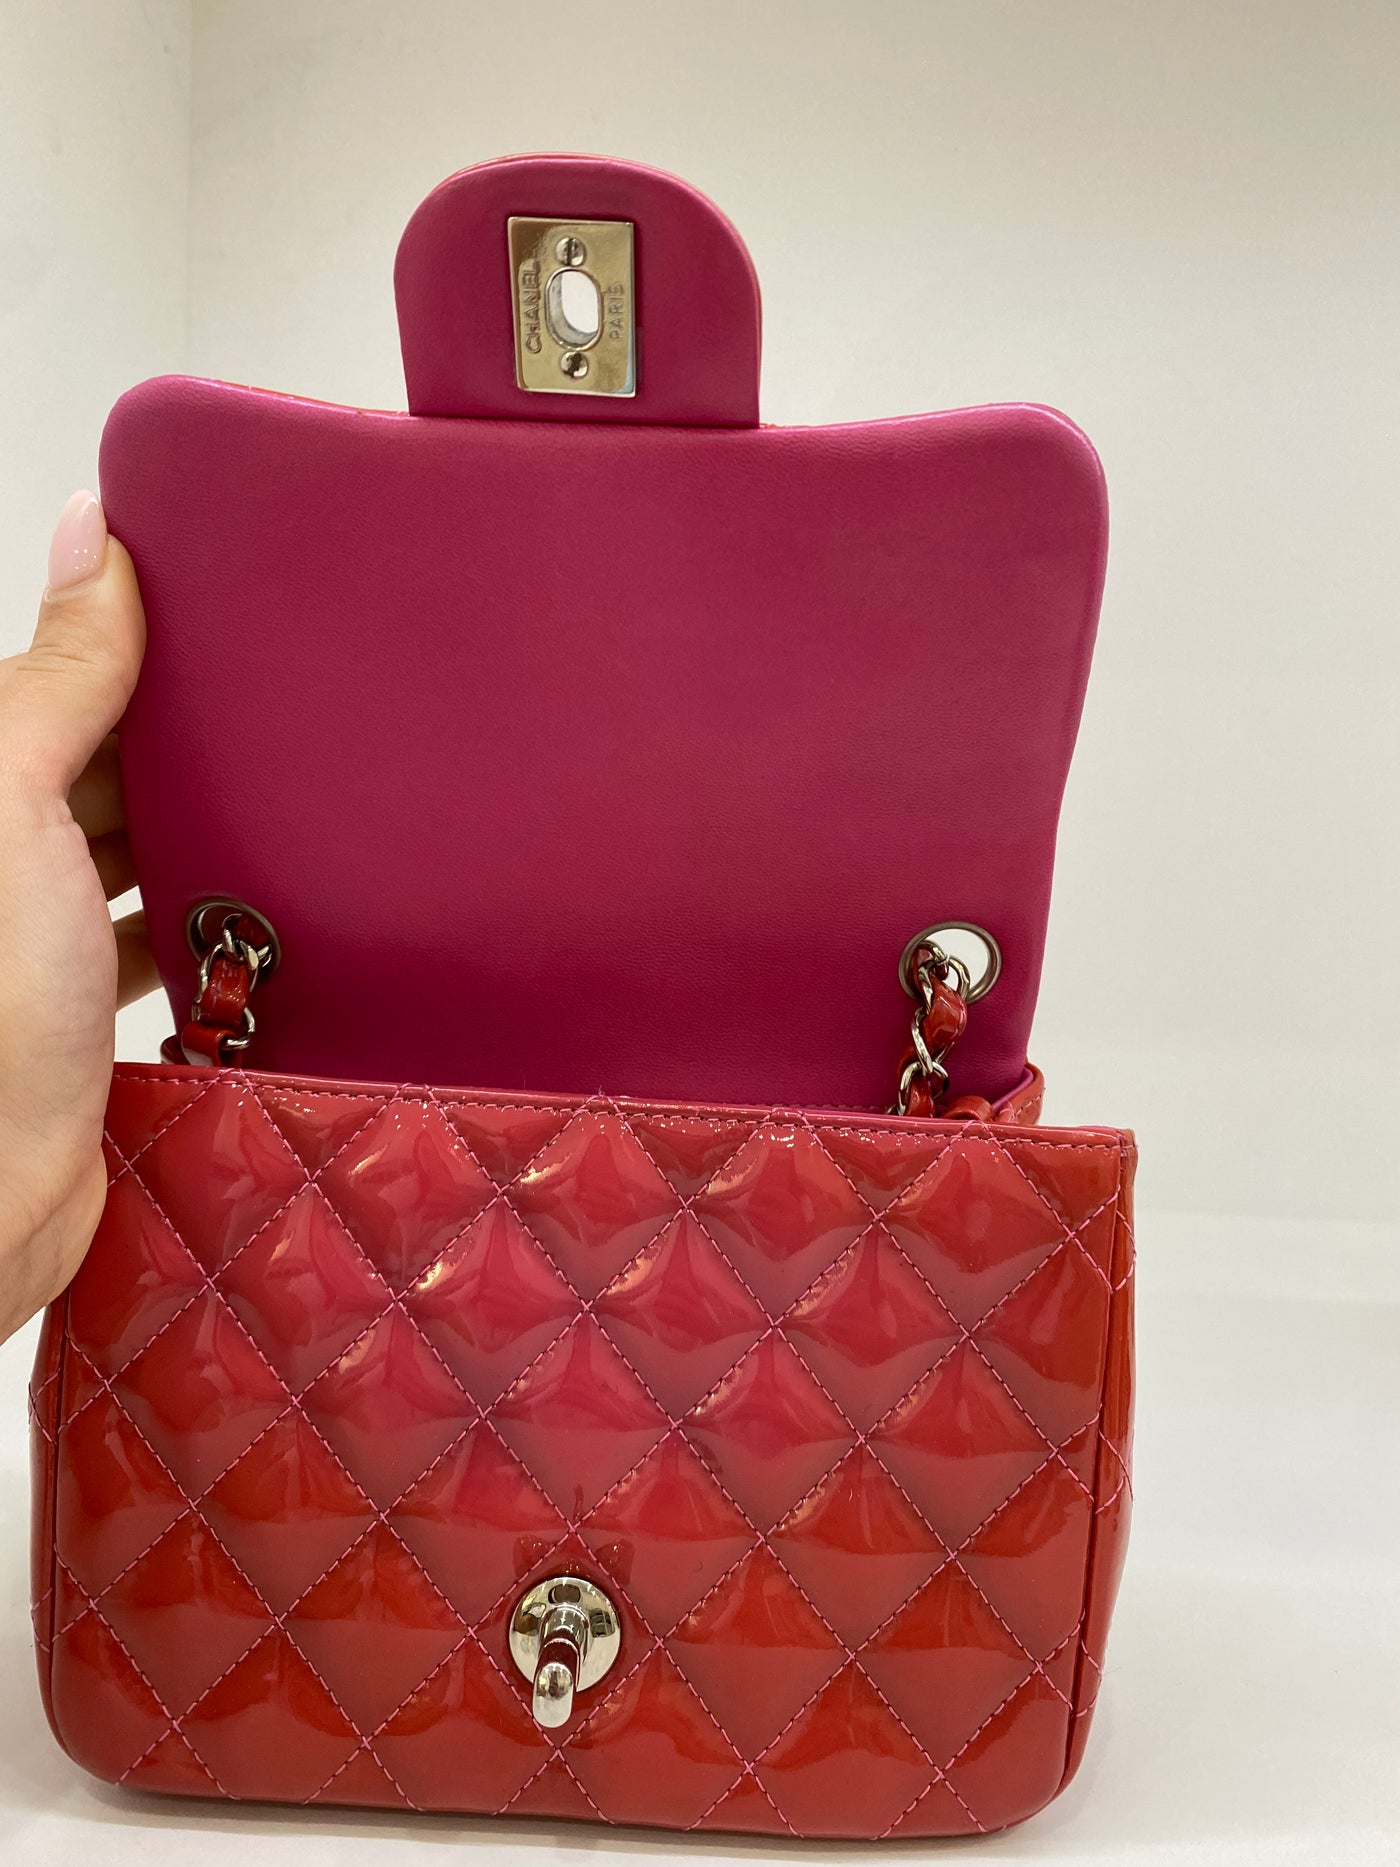 Chanel Square Mini Red/Pink Patent Classic Flap SHW